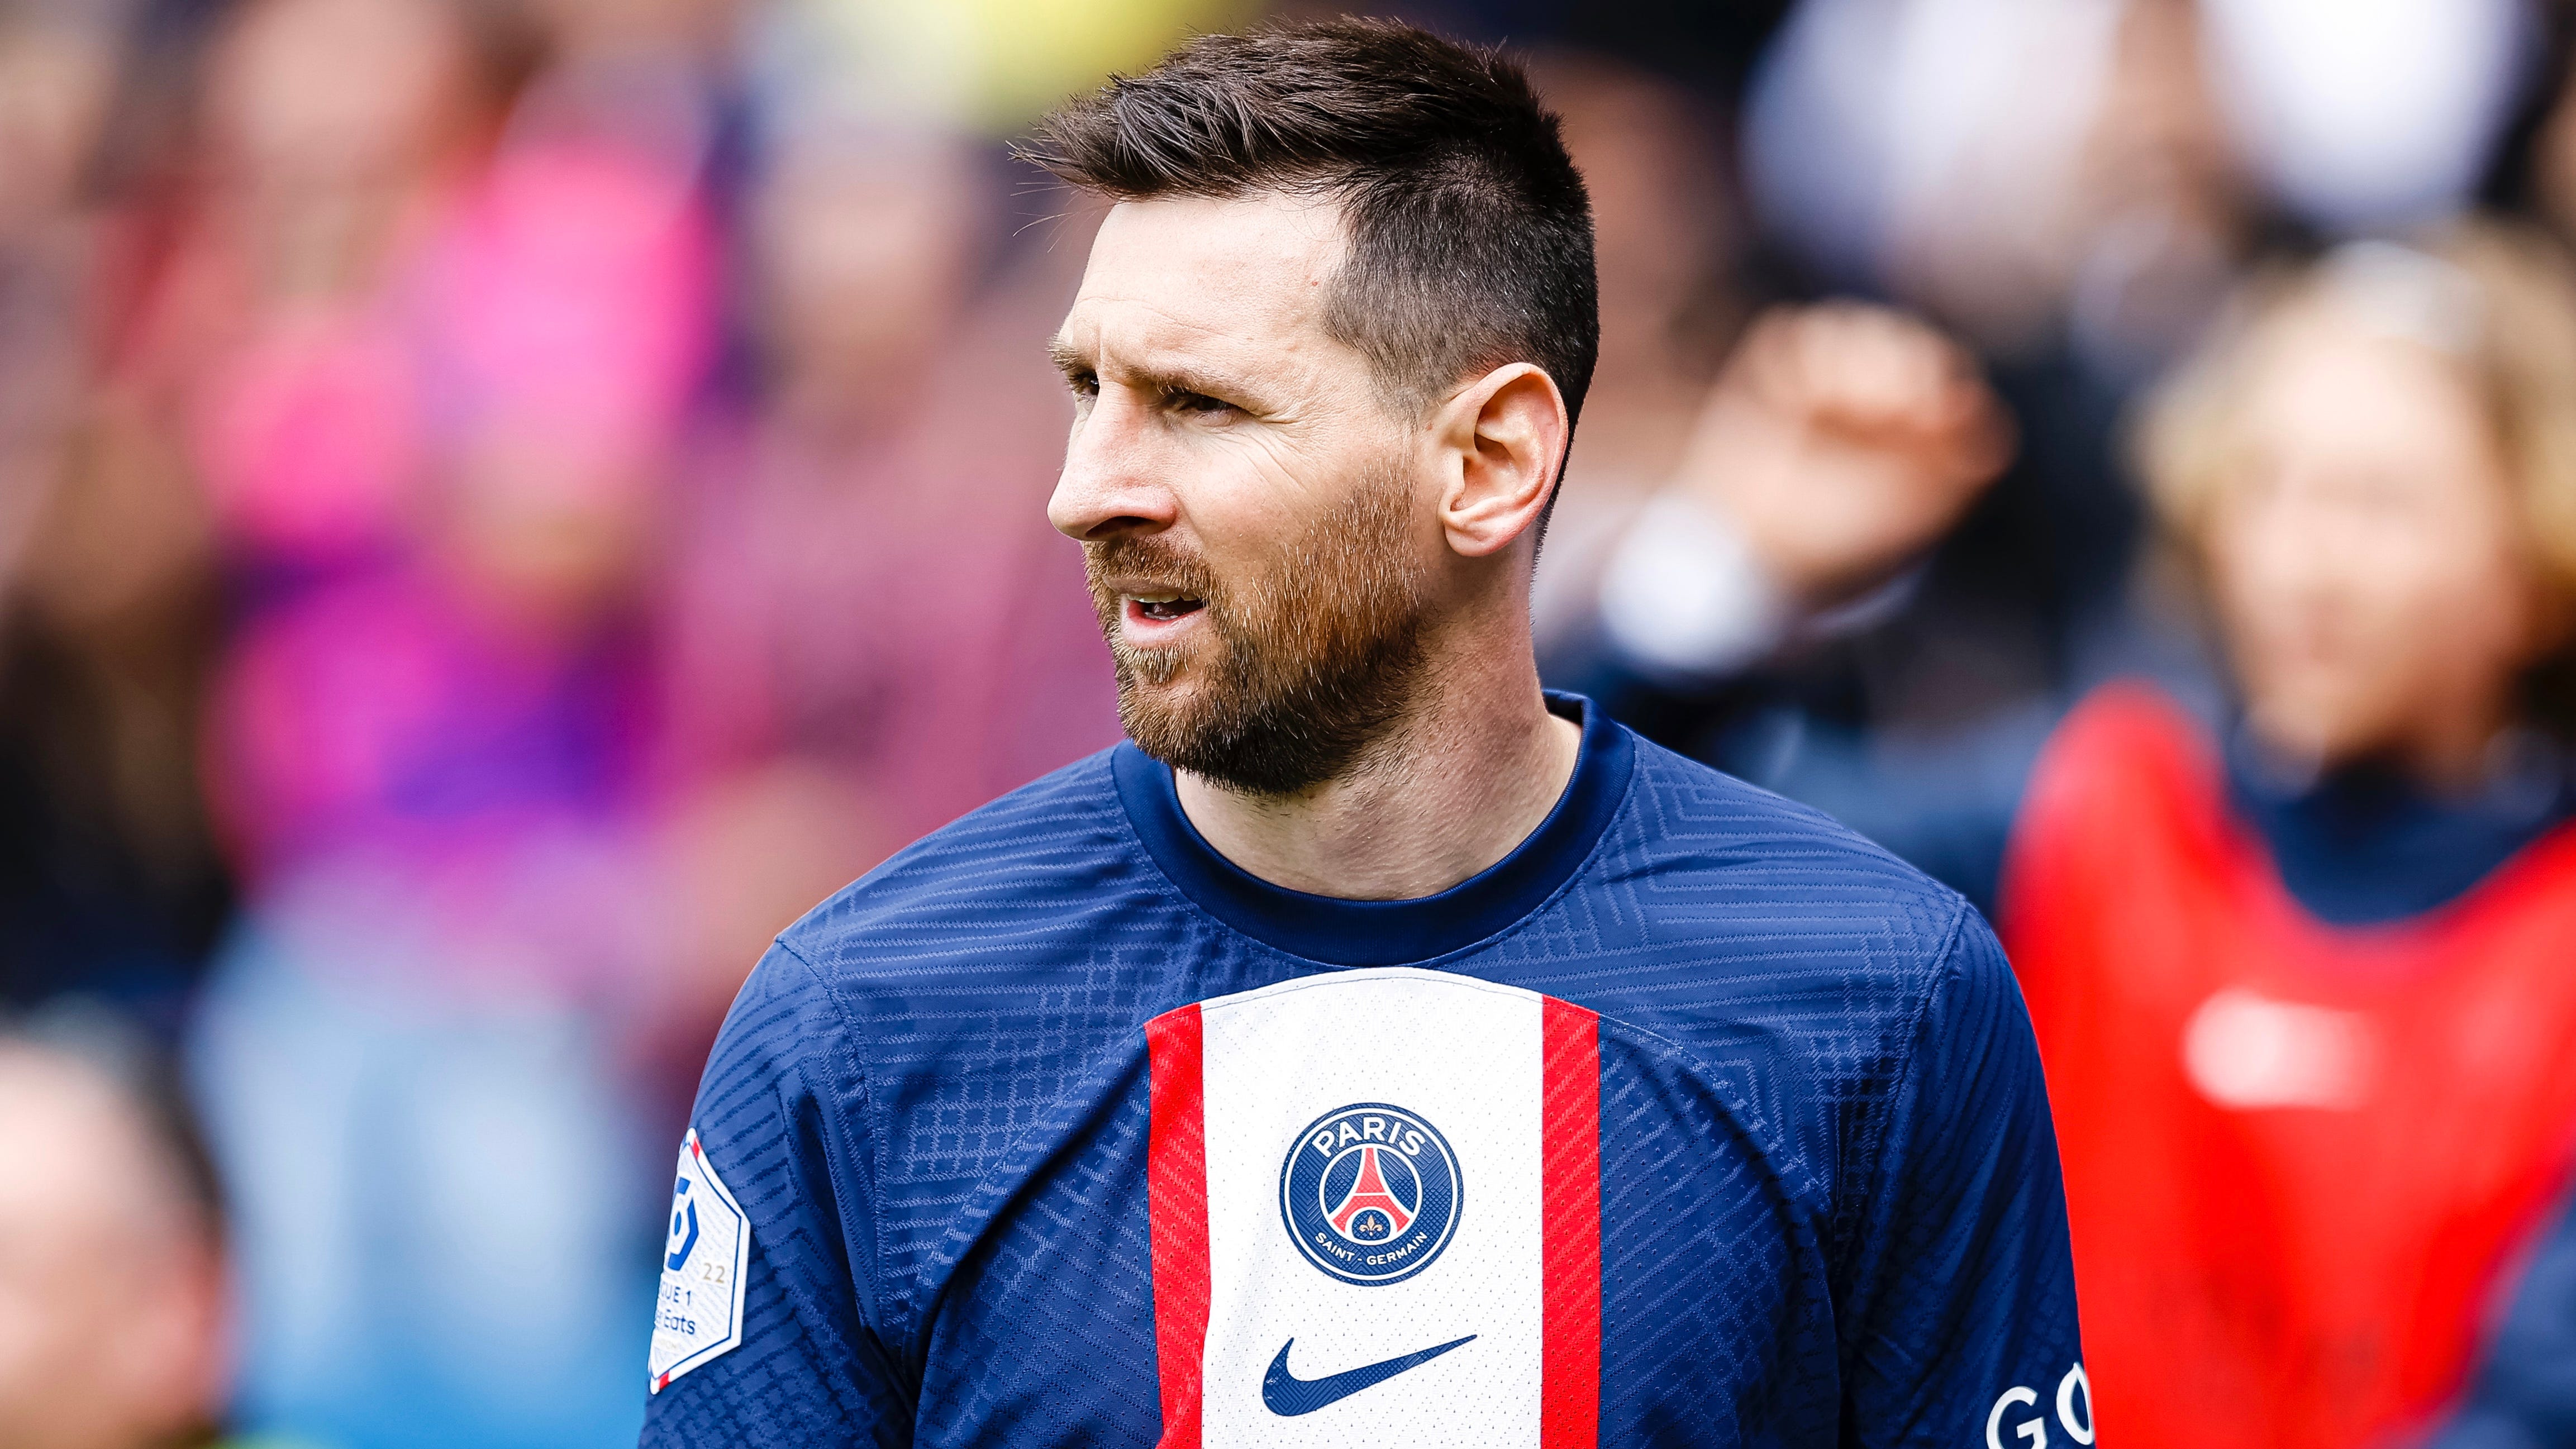 PSG are so predictable! Ending Lionel Messi’s suspension early shows superstar players still rule in Paris | Goal.com